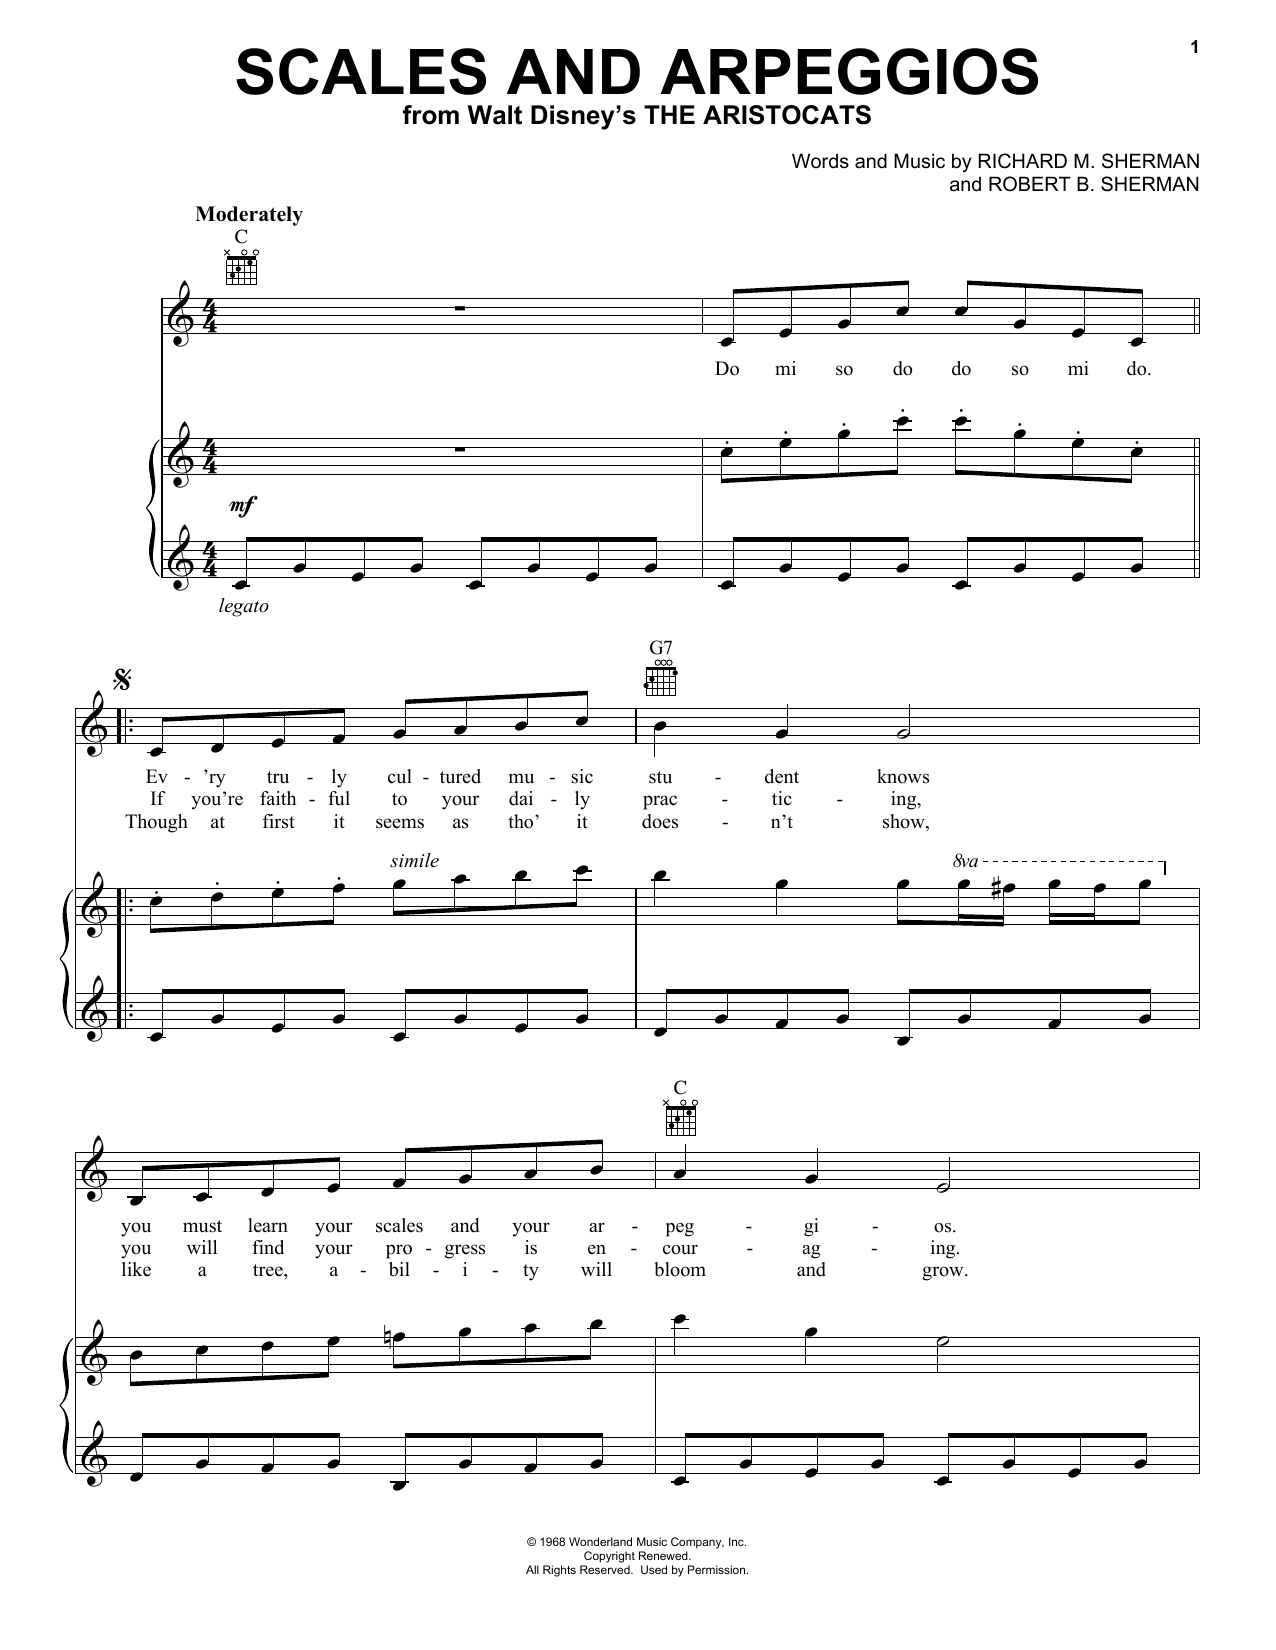 Sherman Brothers Scales And Arpeggios sheet music notes printable PDF score